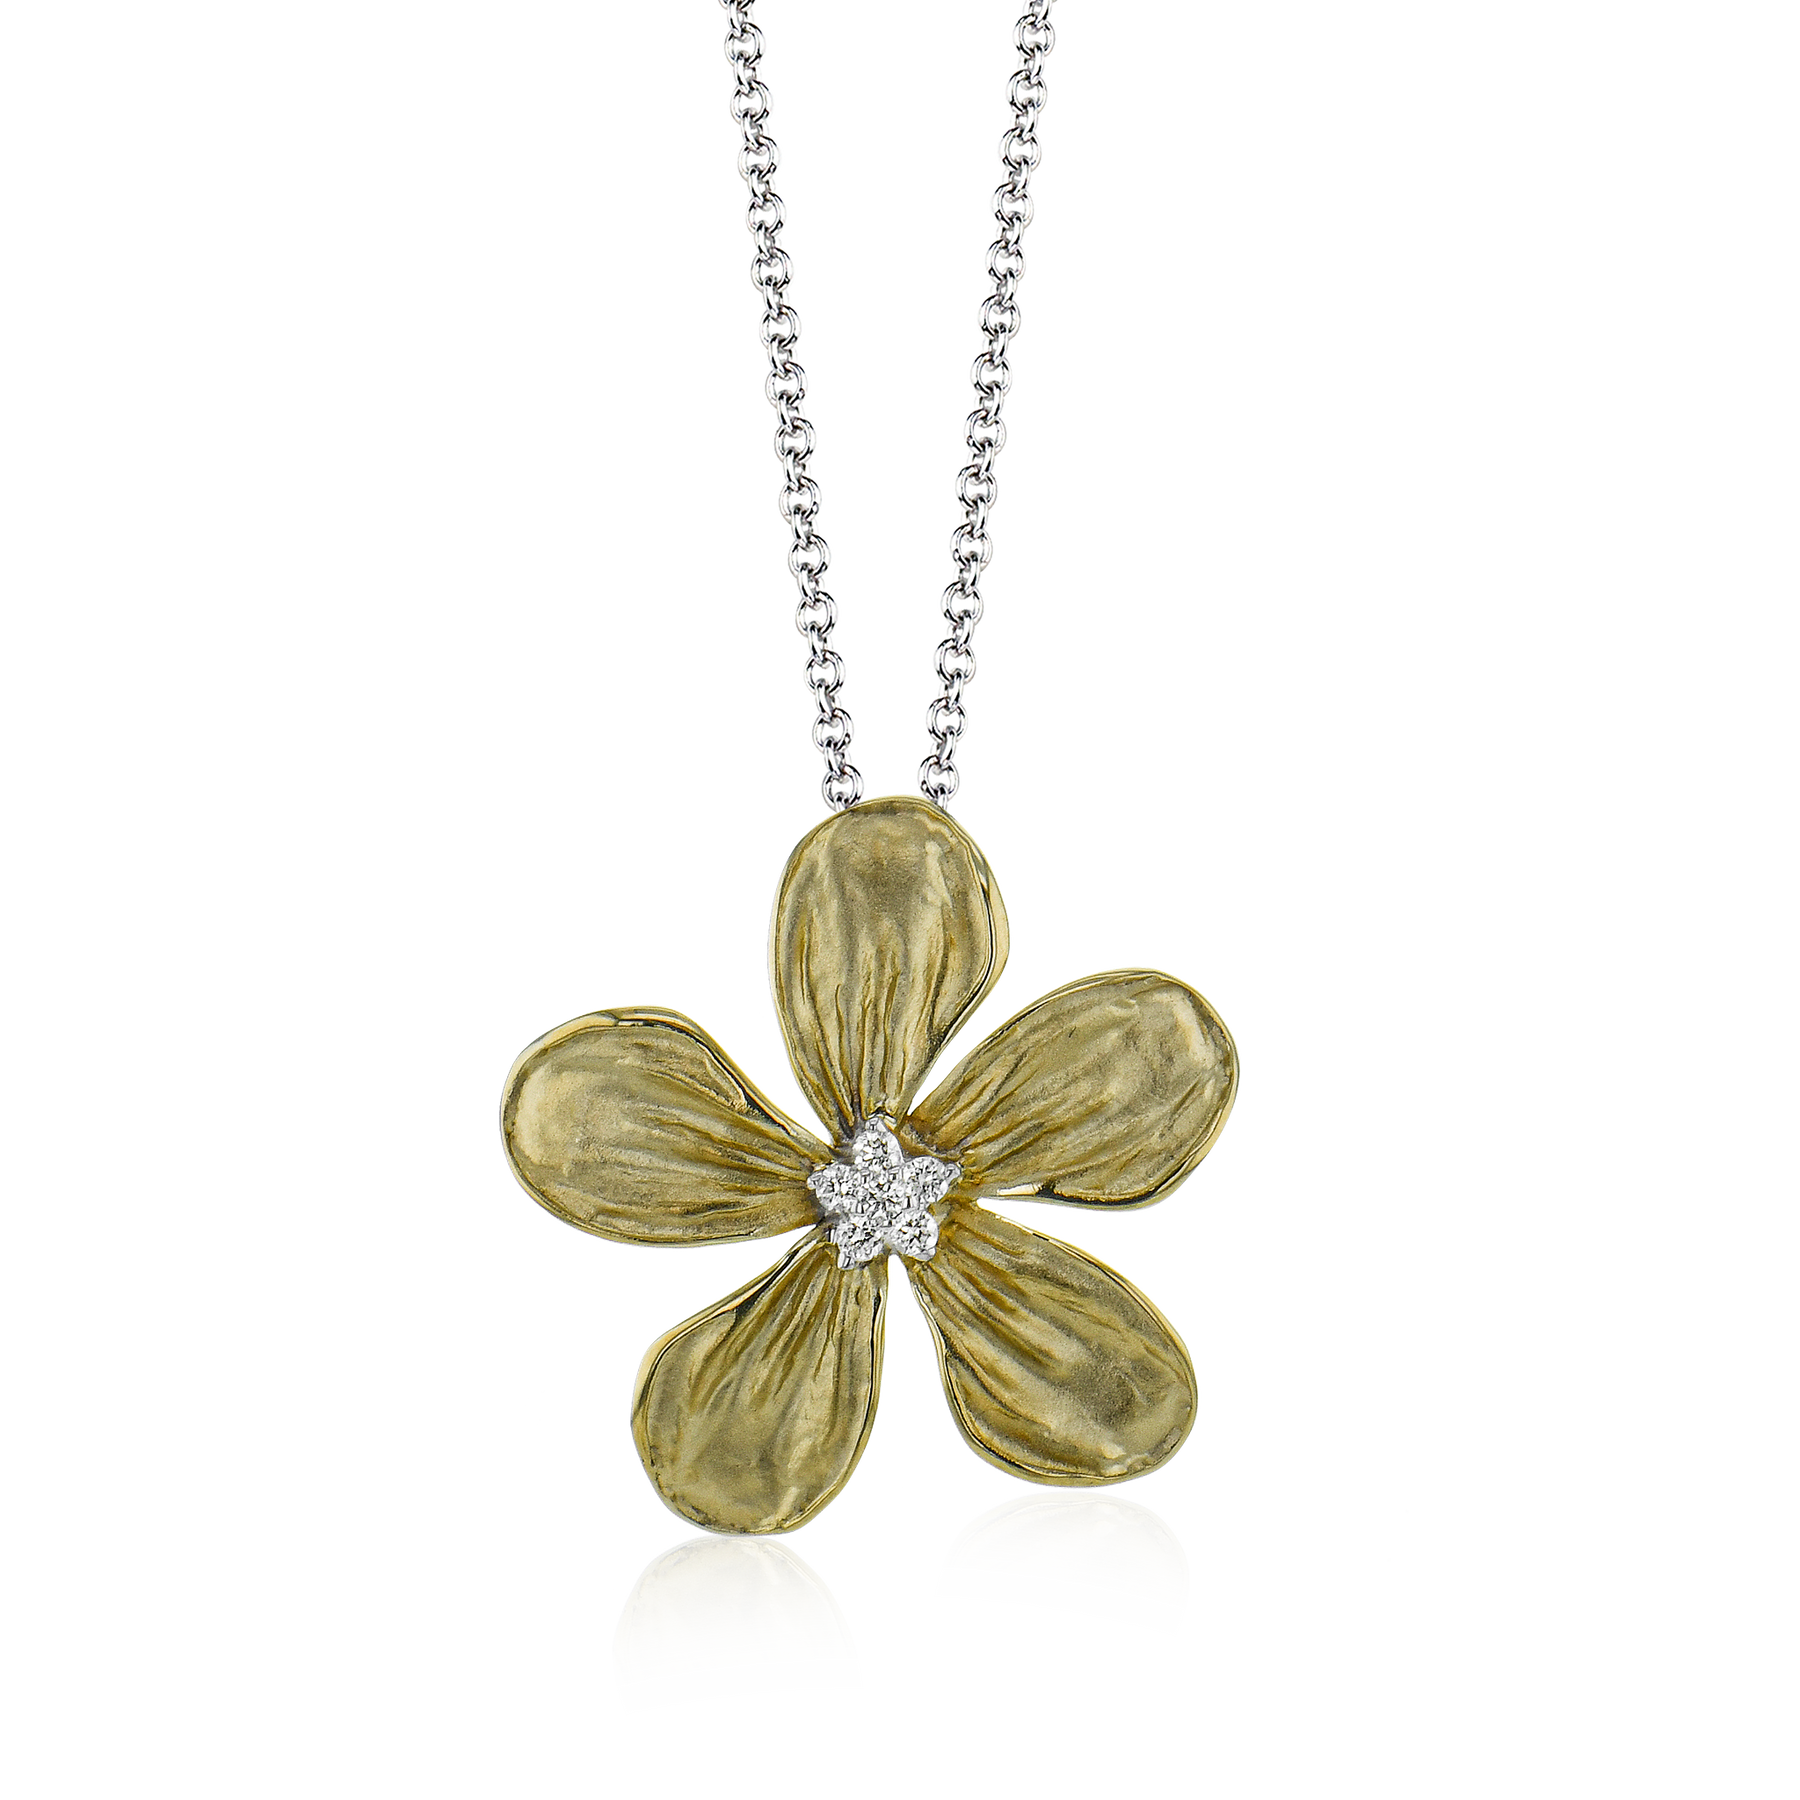 Flower Pendant Necklace in 18k Gold with Diamonds LP4845